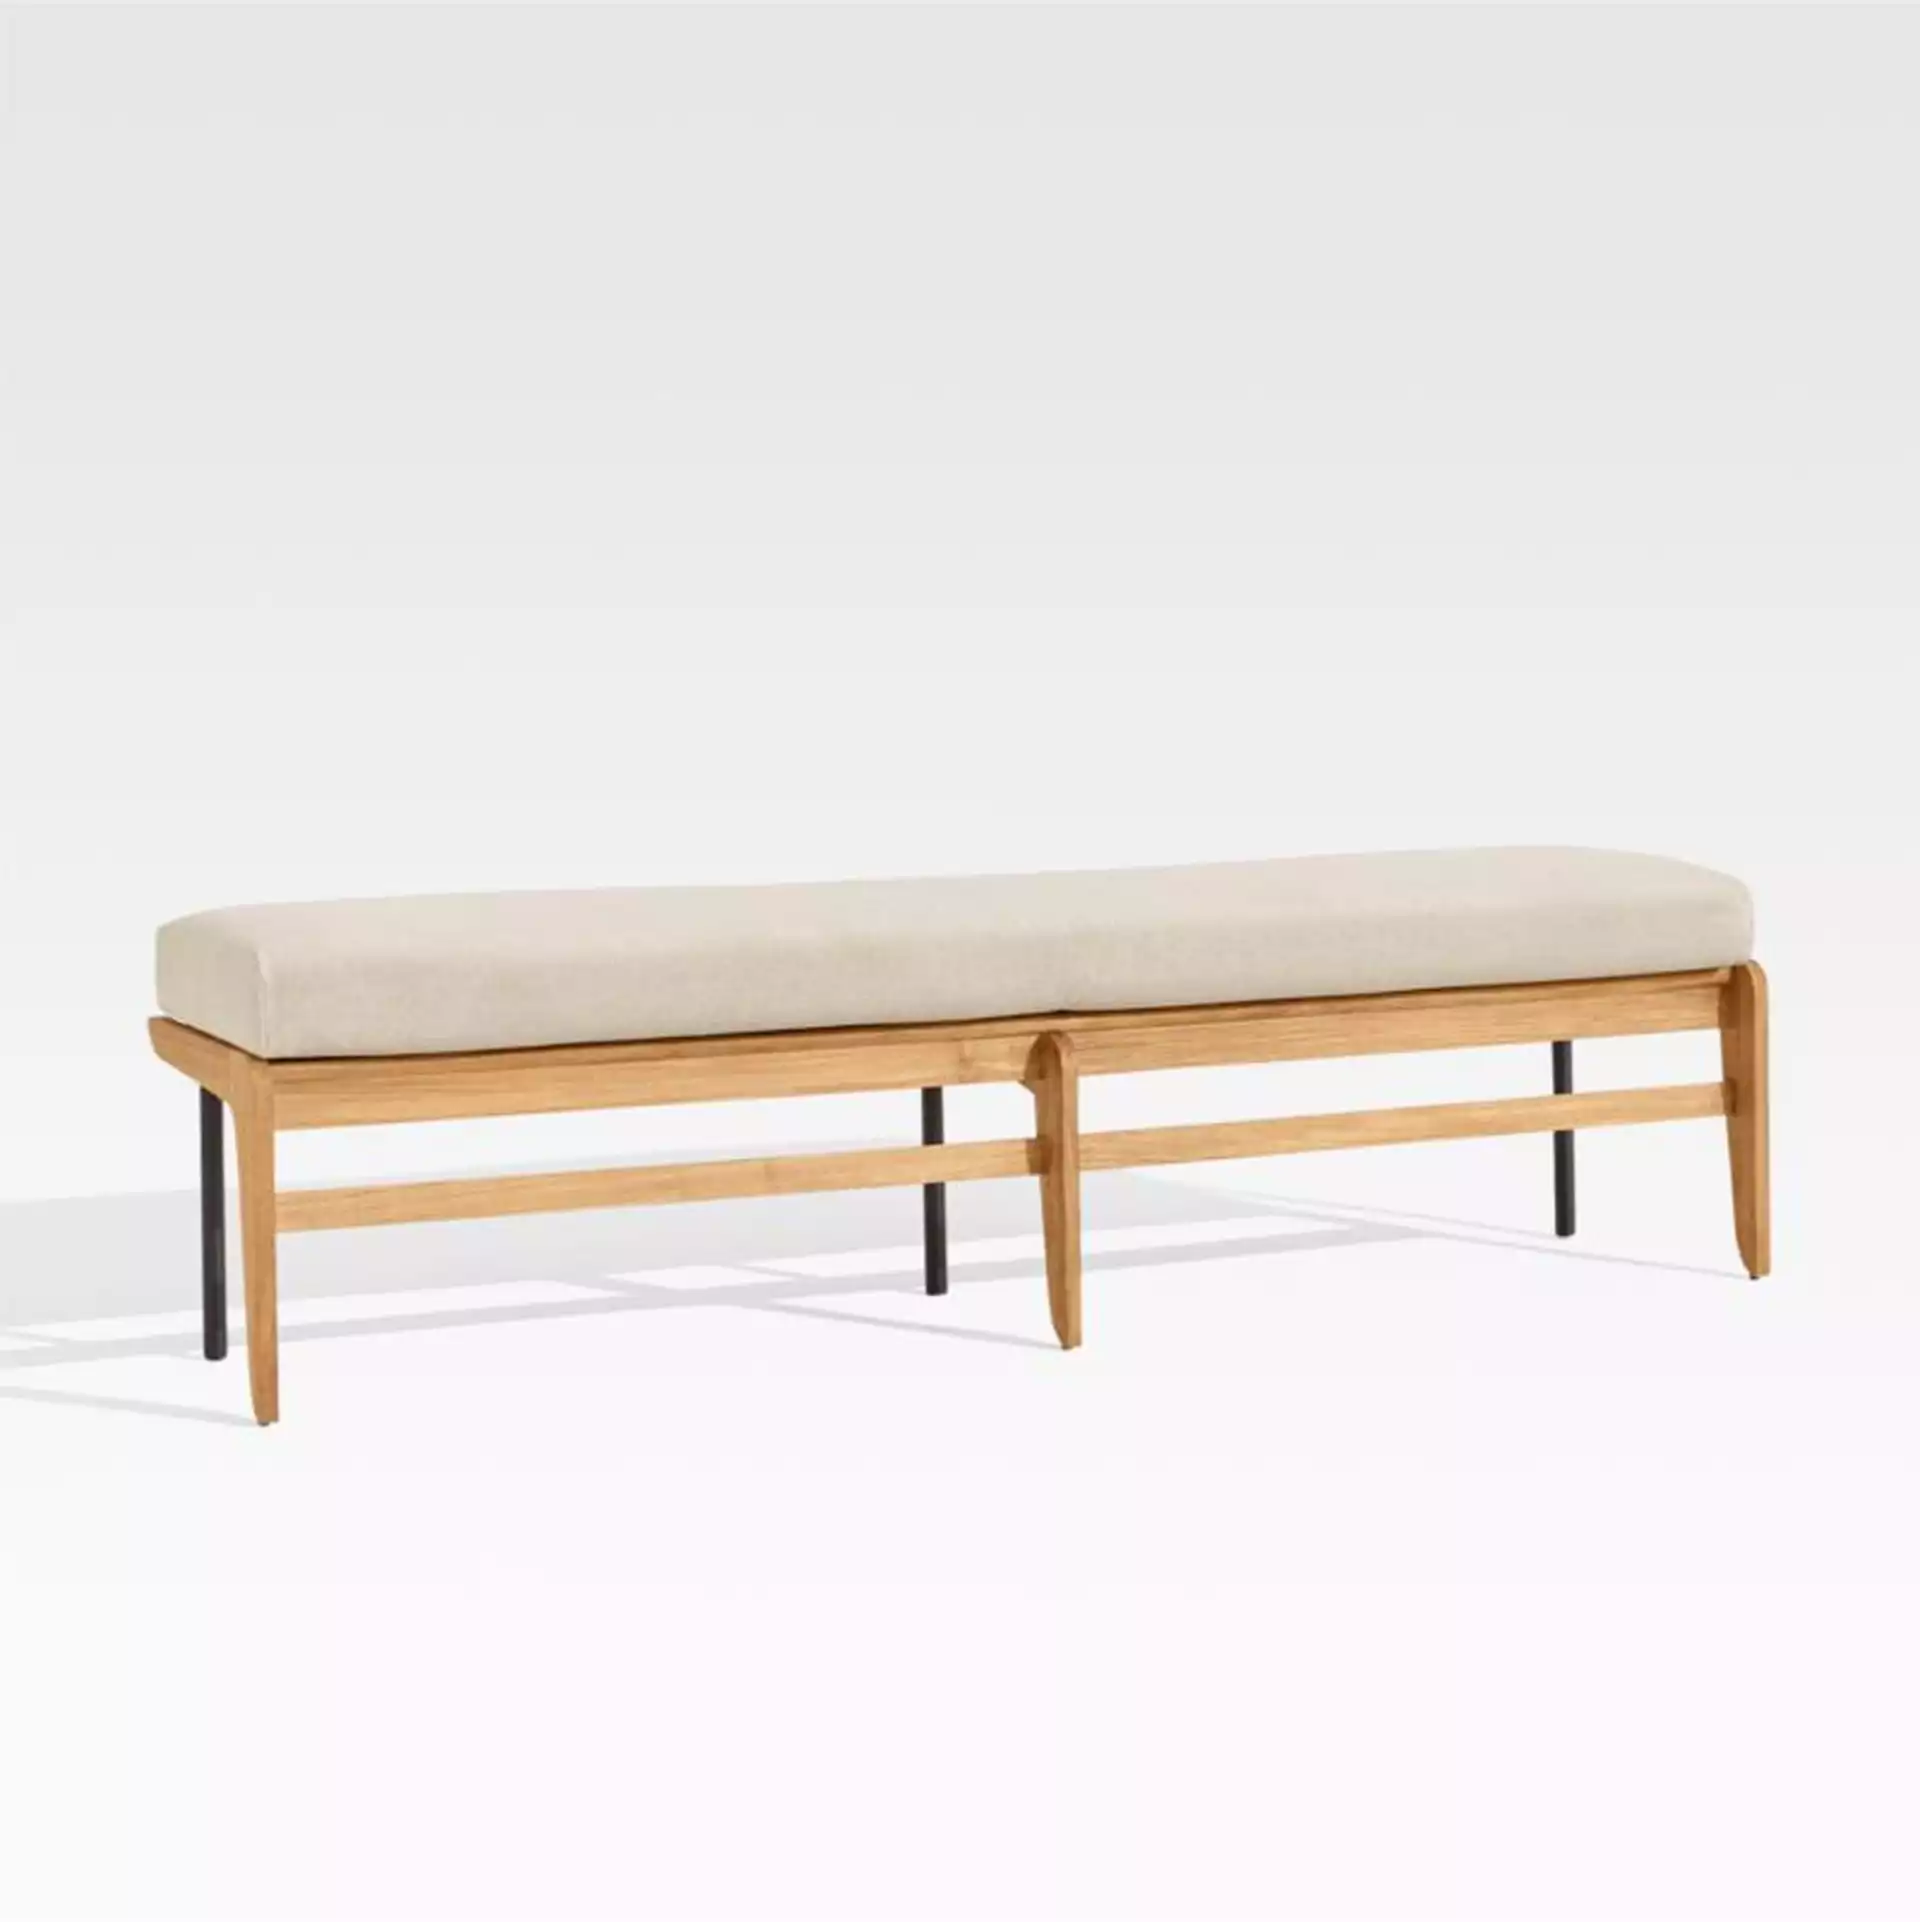 Kinney Teak Outdoor Dining Bench with Cushion